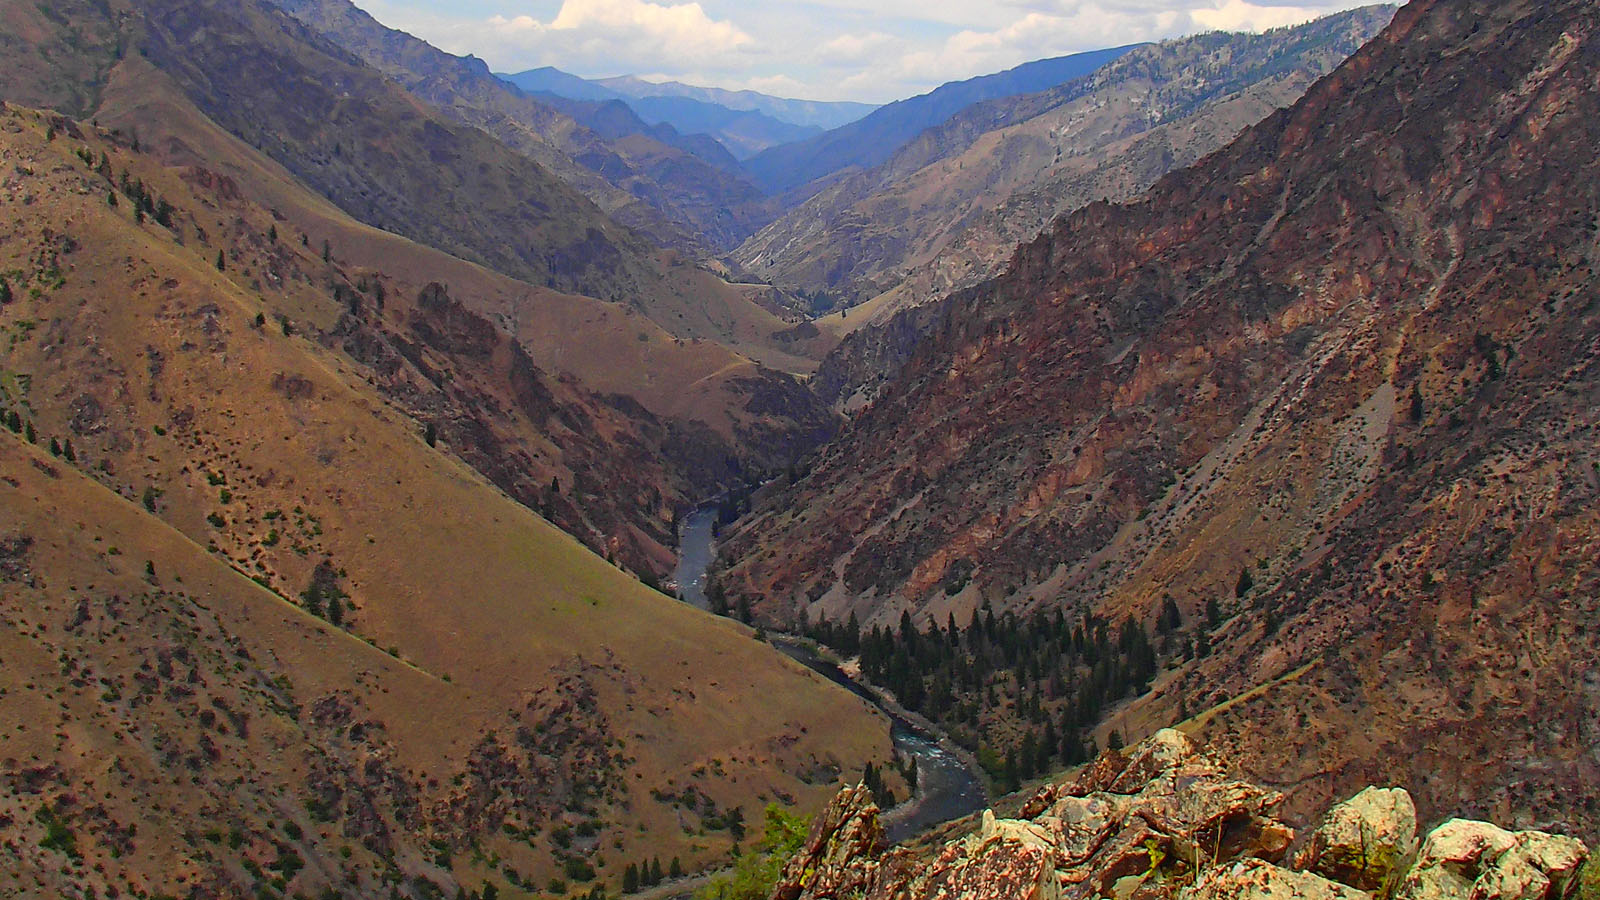 Looking upstream on the Middle Fork of the Salmon River in Idaho